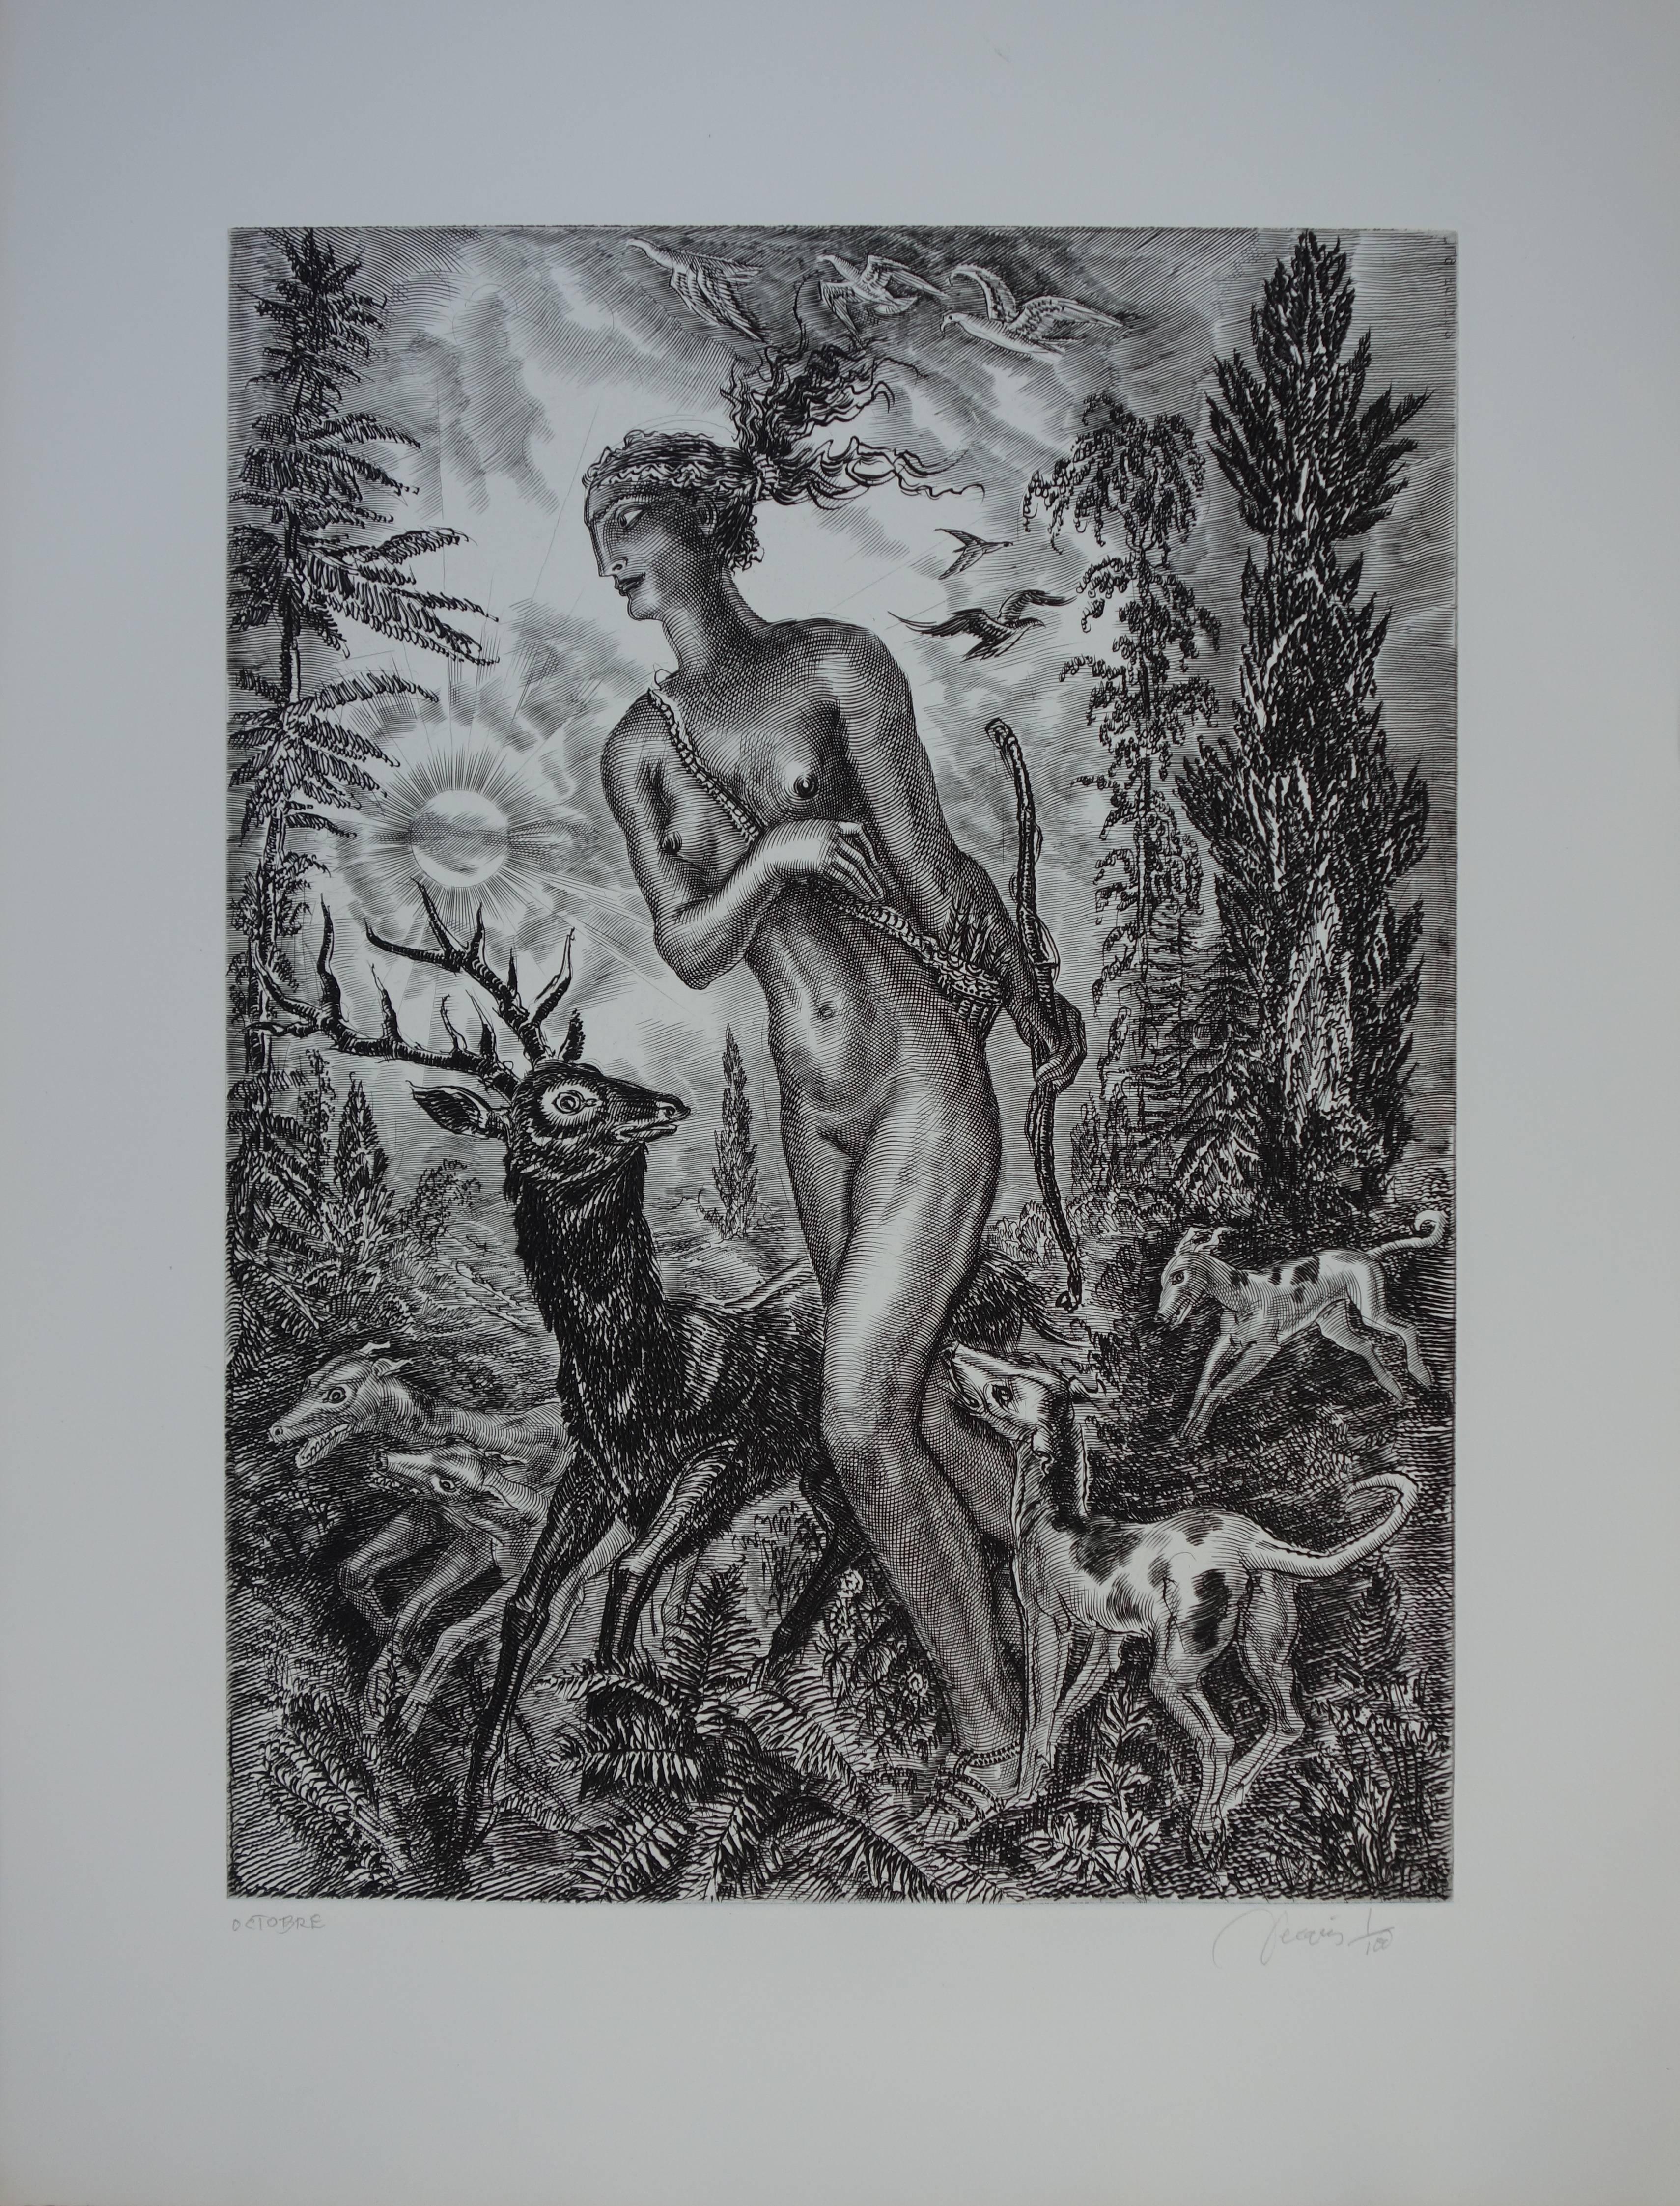 October : Diane the Huntress - Original handsigned etching - Exceptional n°1/100 - Realist Print by Albert Decaris